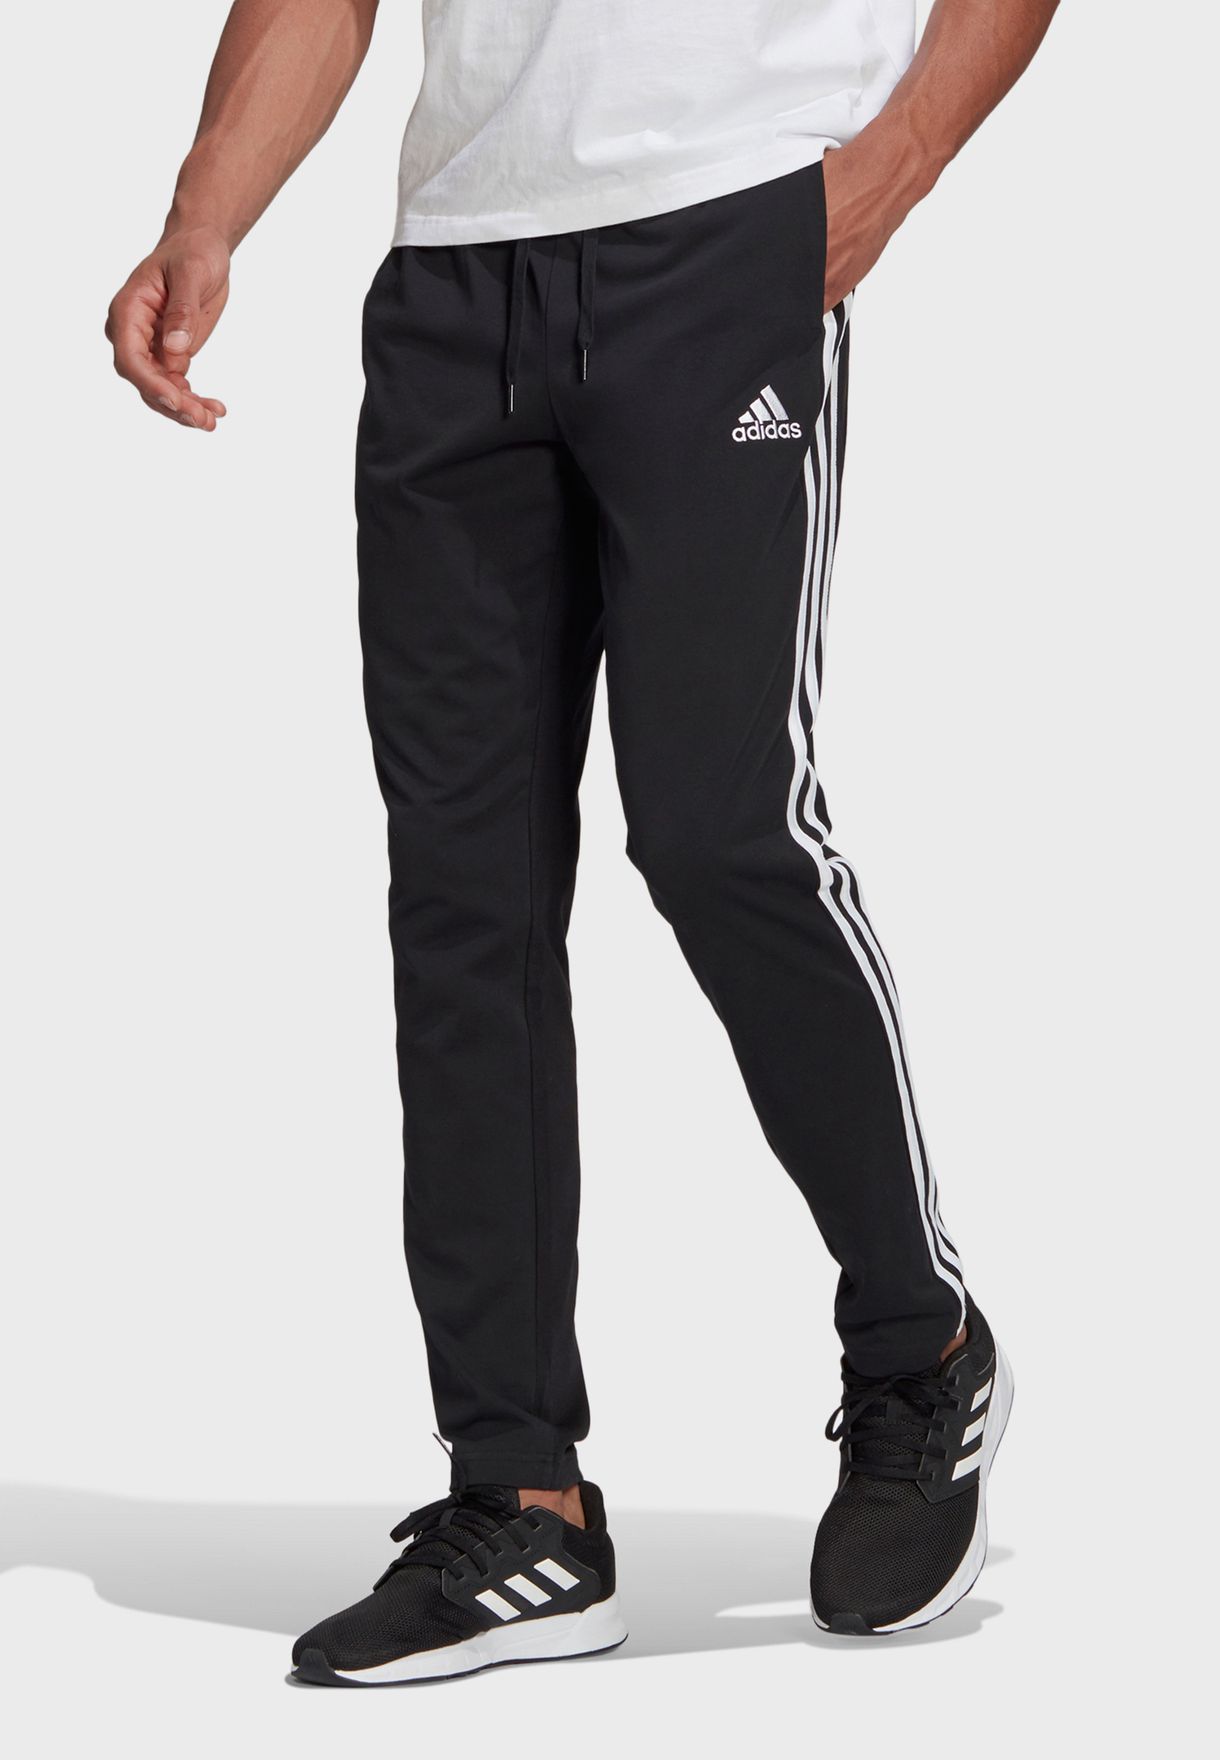 Buy adidas black 3 Stripe Sweatpants for Men in Doha, other cities